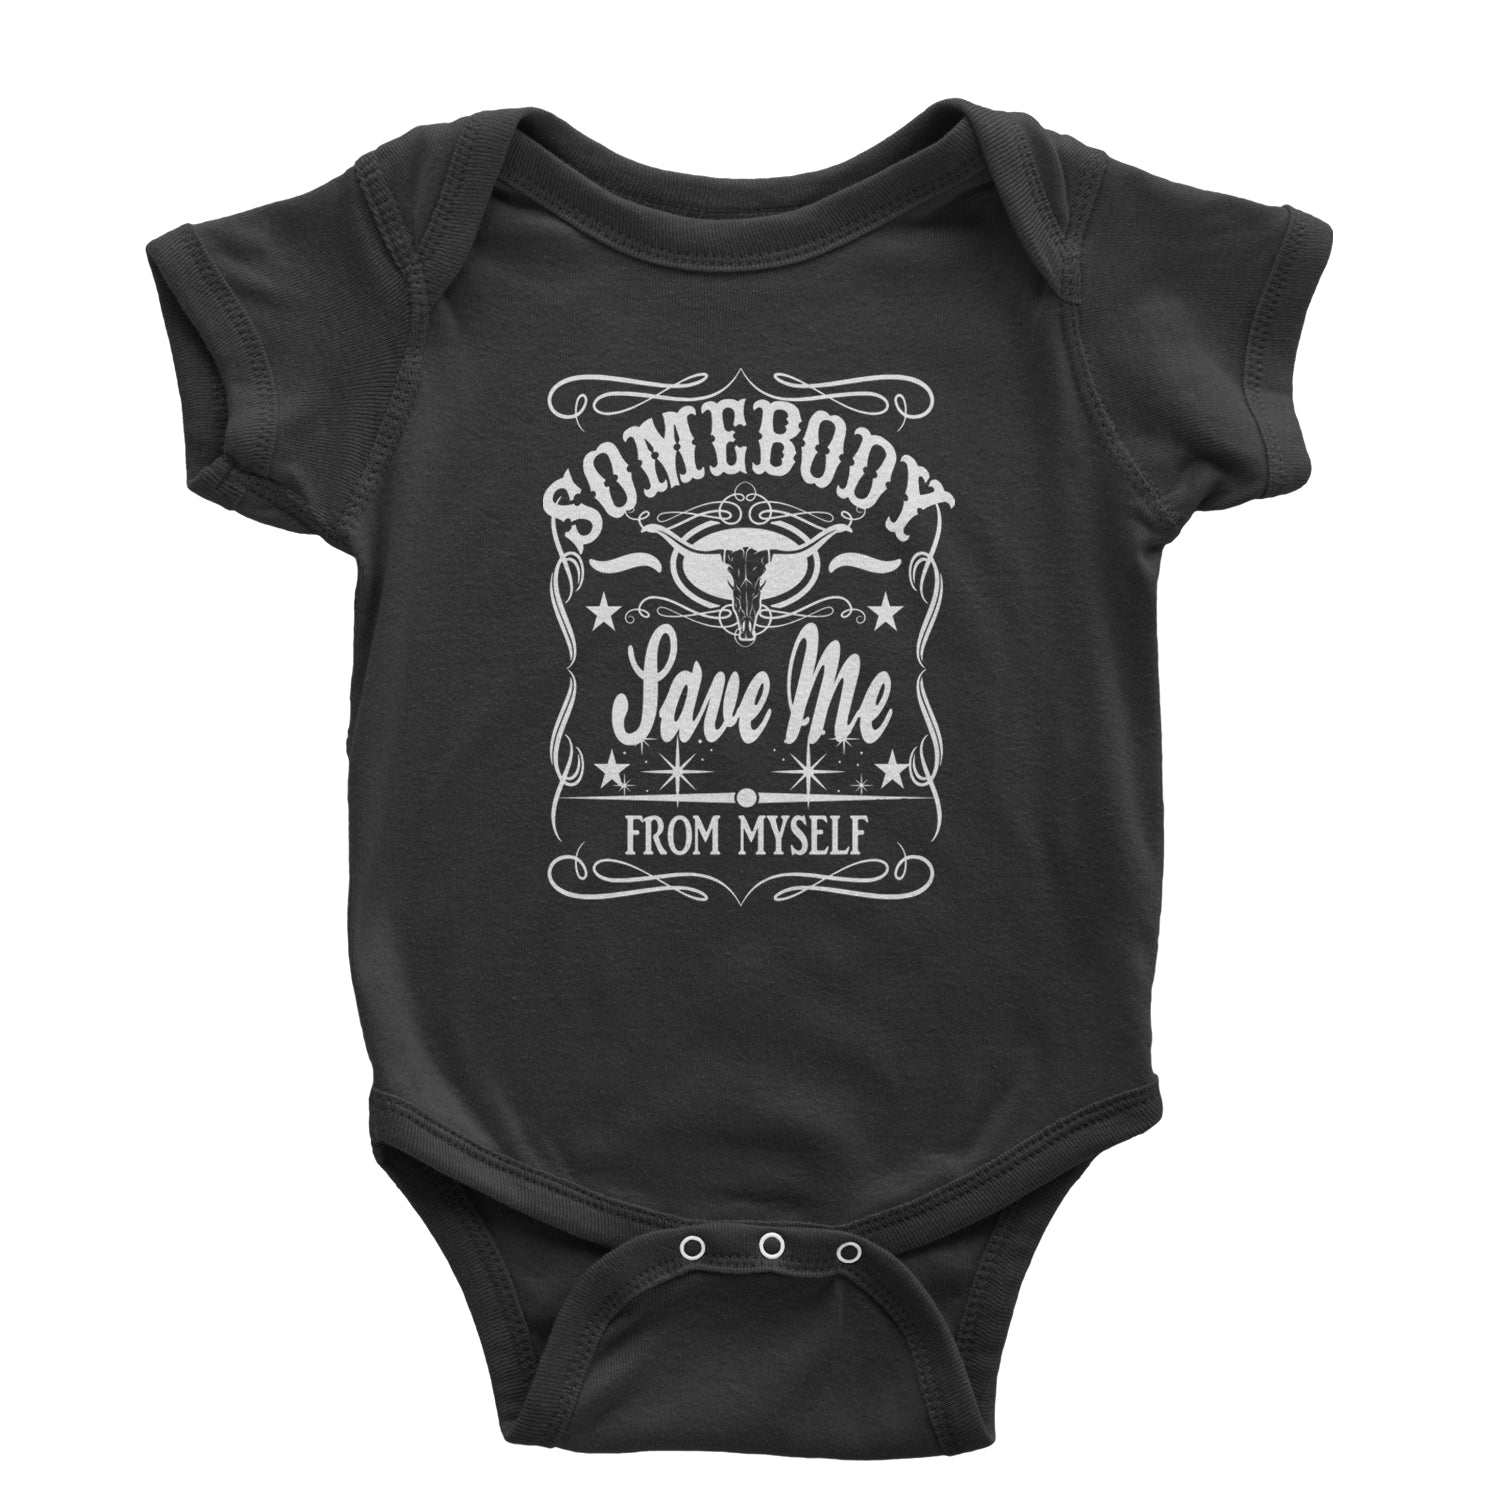 Somebody Save Me From Myself Son Of A Sinner Infant One-Piece Romper Bodysuit and Toddler T-shirt